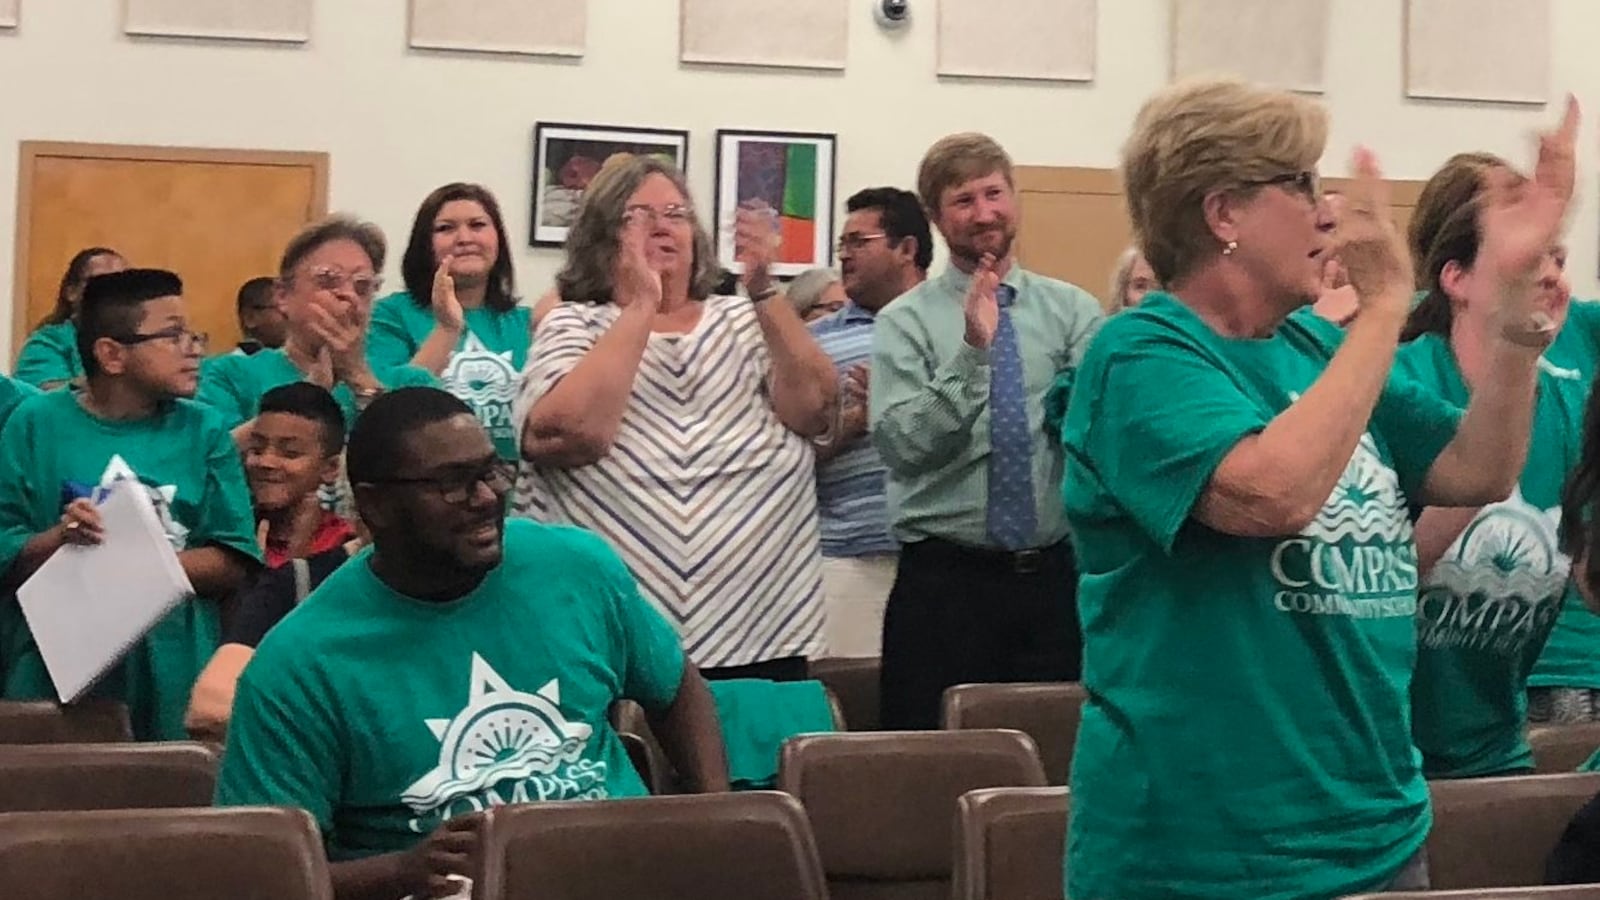 Supporters of New Day Schools, which plans to open six schools in the buildings currently used by Jubilee Catholic Schools Network, applaud the decision of Shelby County Schools board.